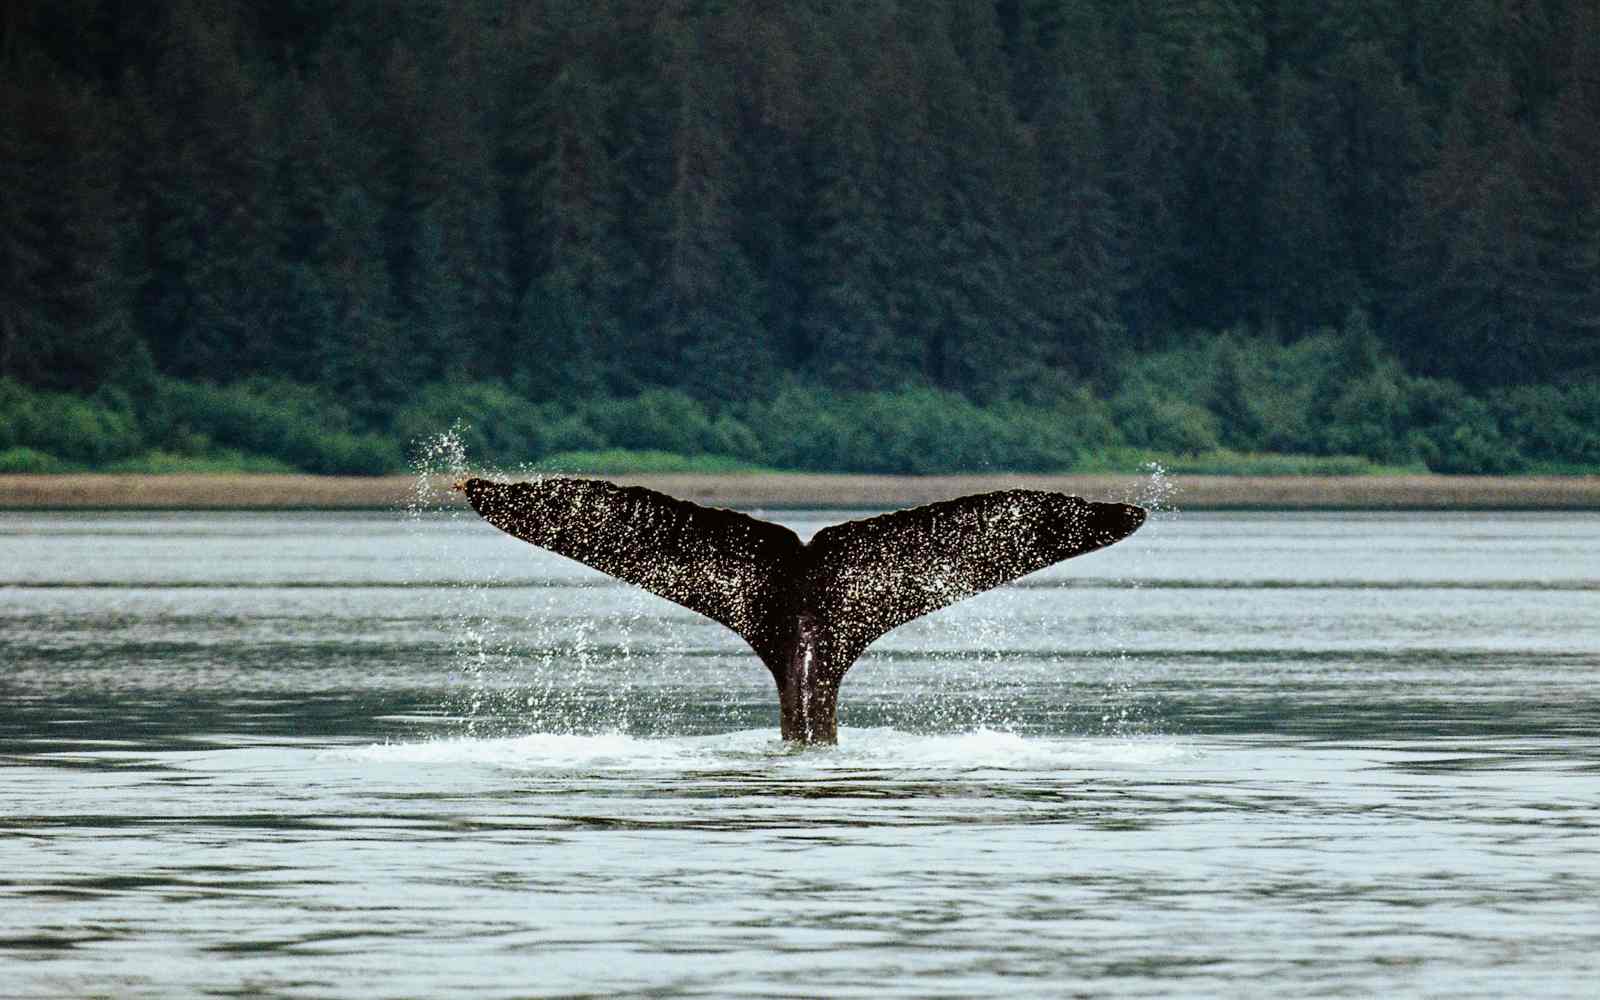 large whale tail breaching in the salish sea between vancouver and victoria